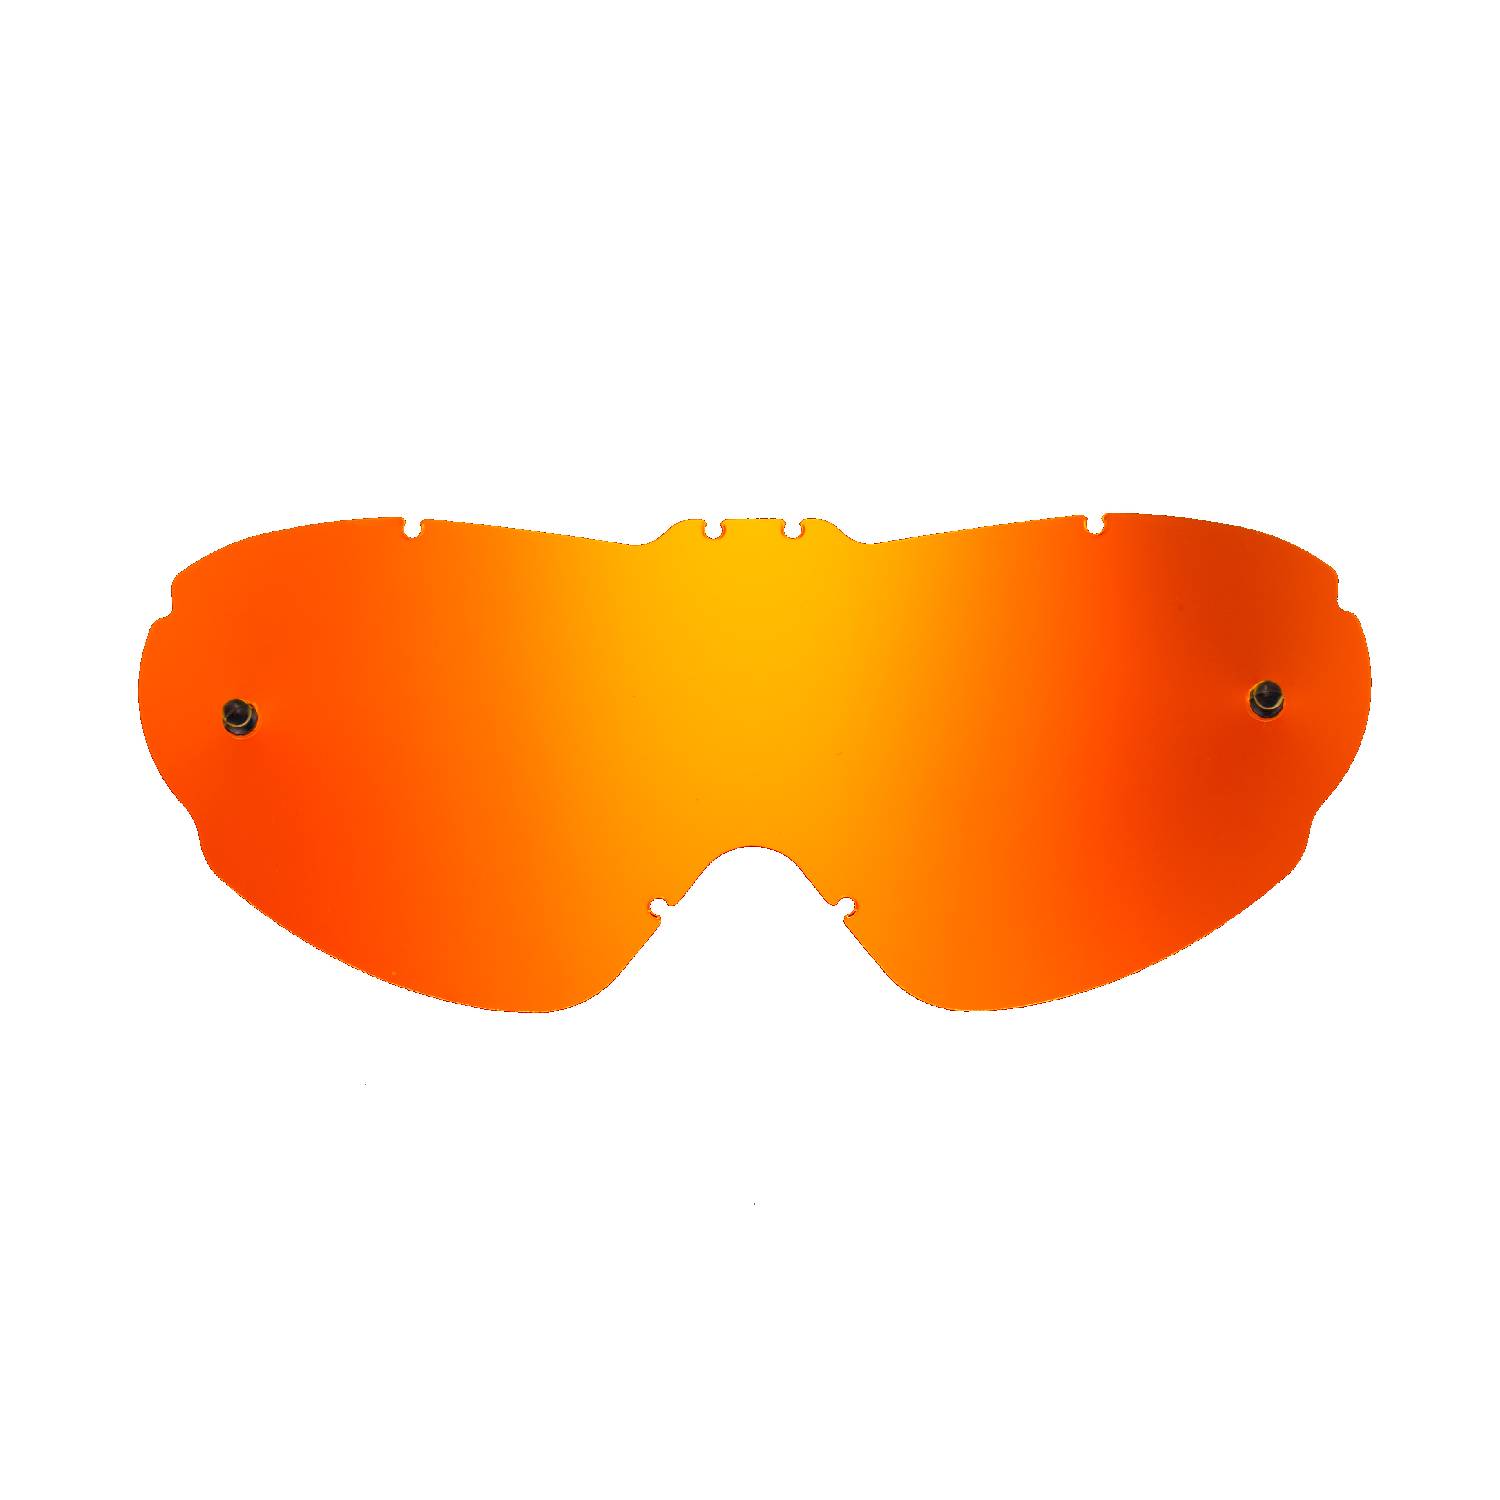 red-toned mirrored replacement lenses for goggles compatible for Scott Hi voltage work goggle